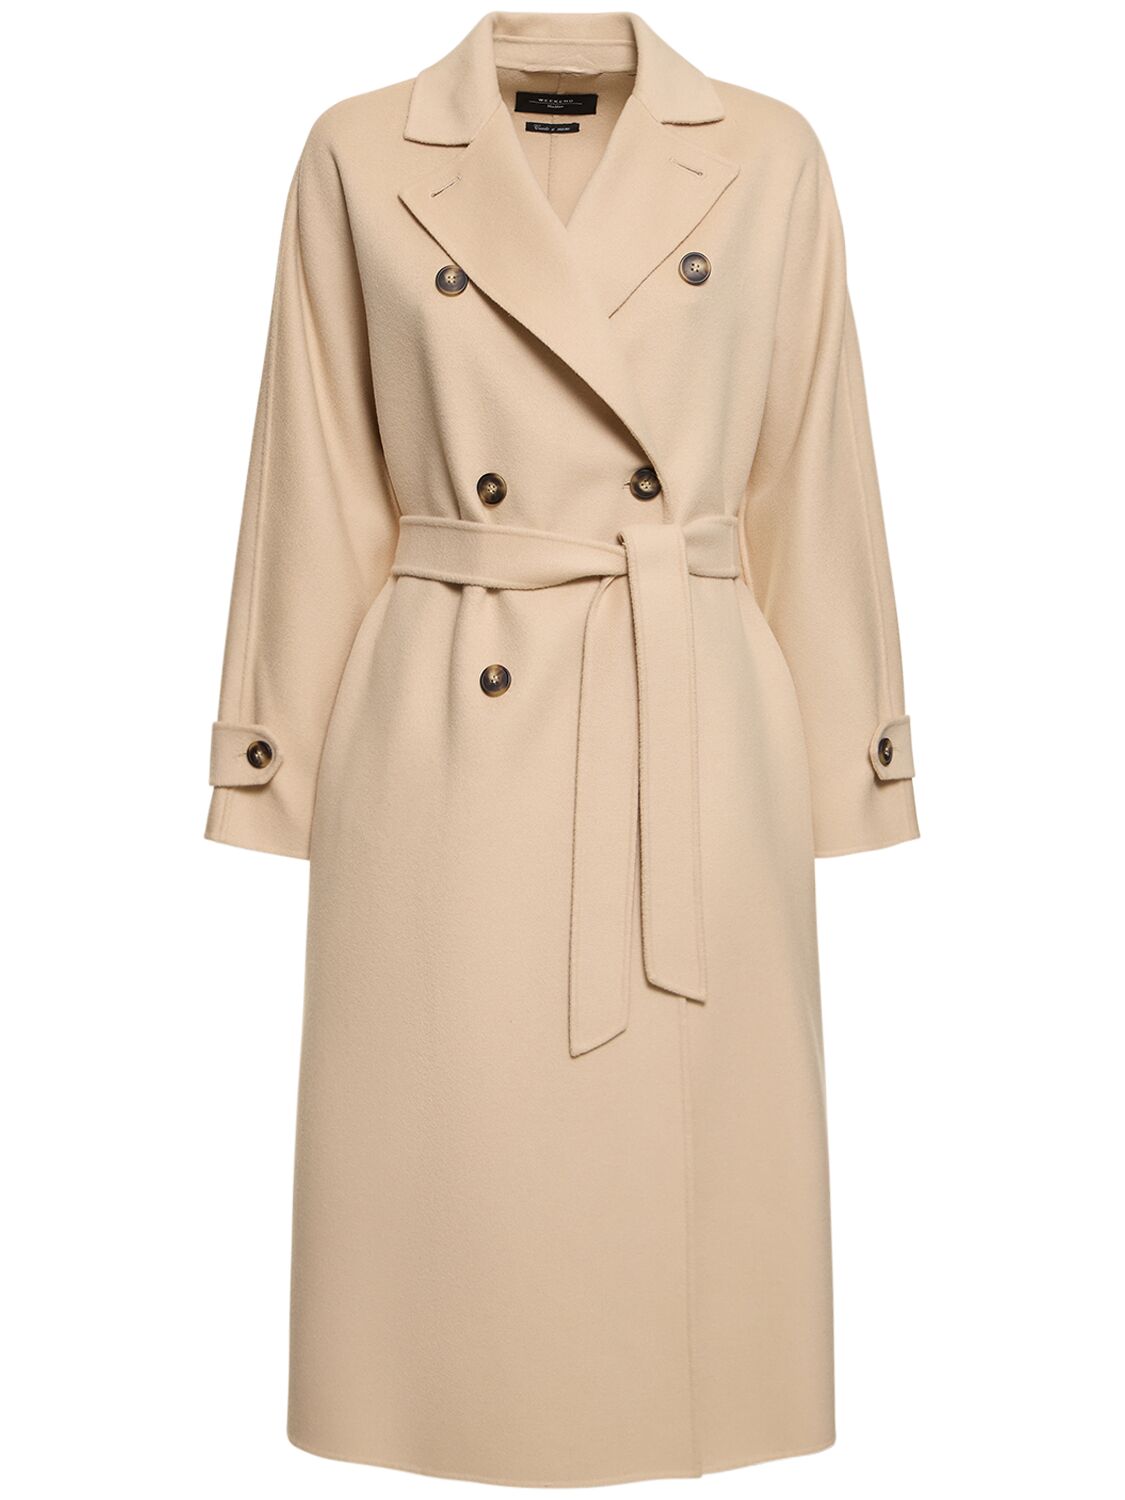 Weekend Max Mara Affetto Long Wool Blend Trench Coat In Light Beige